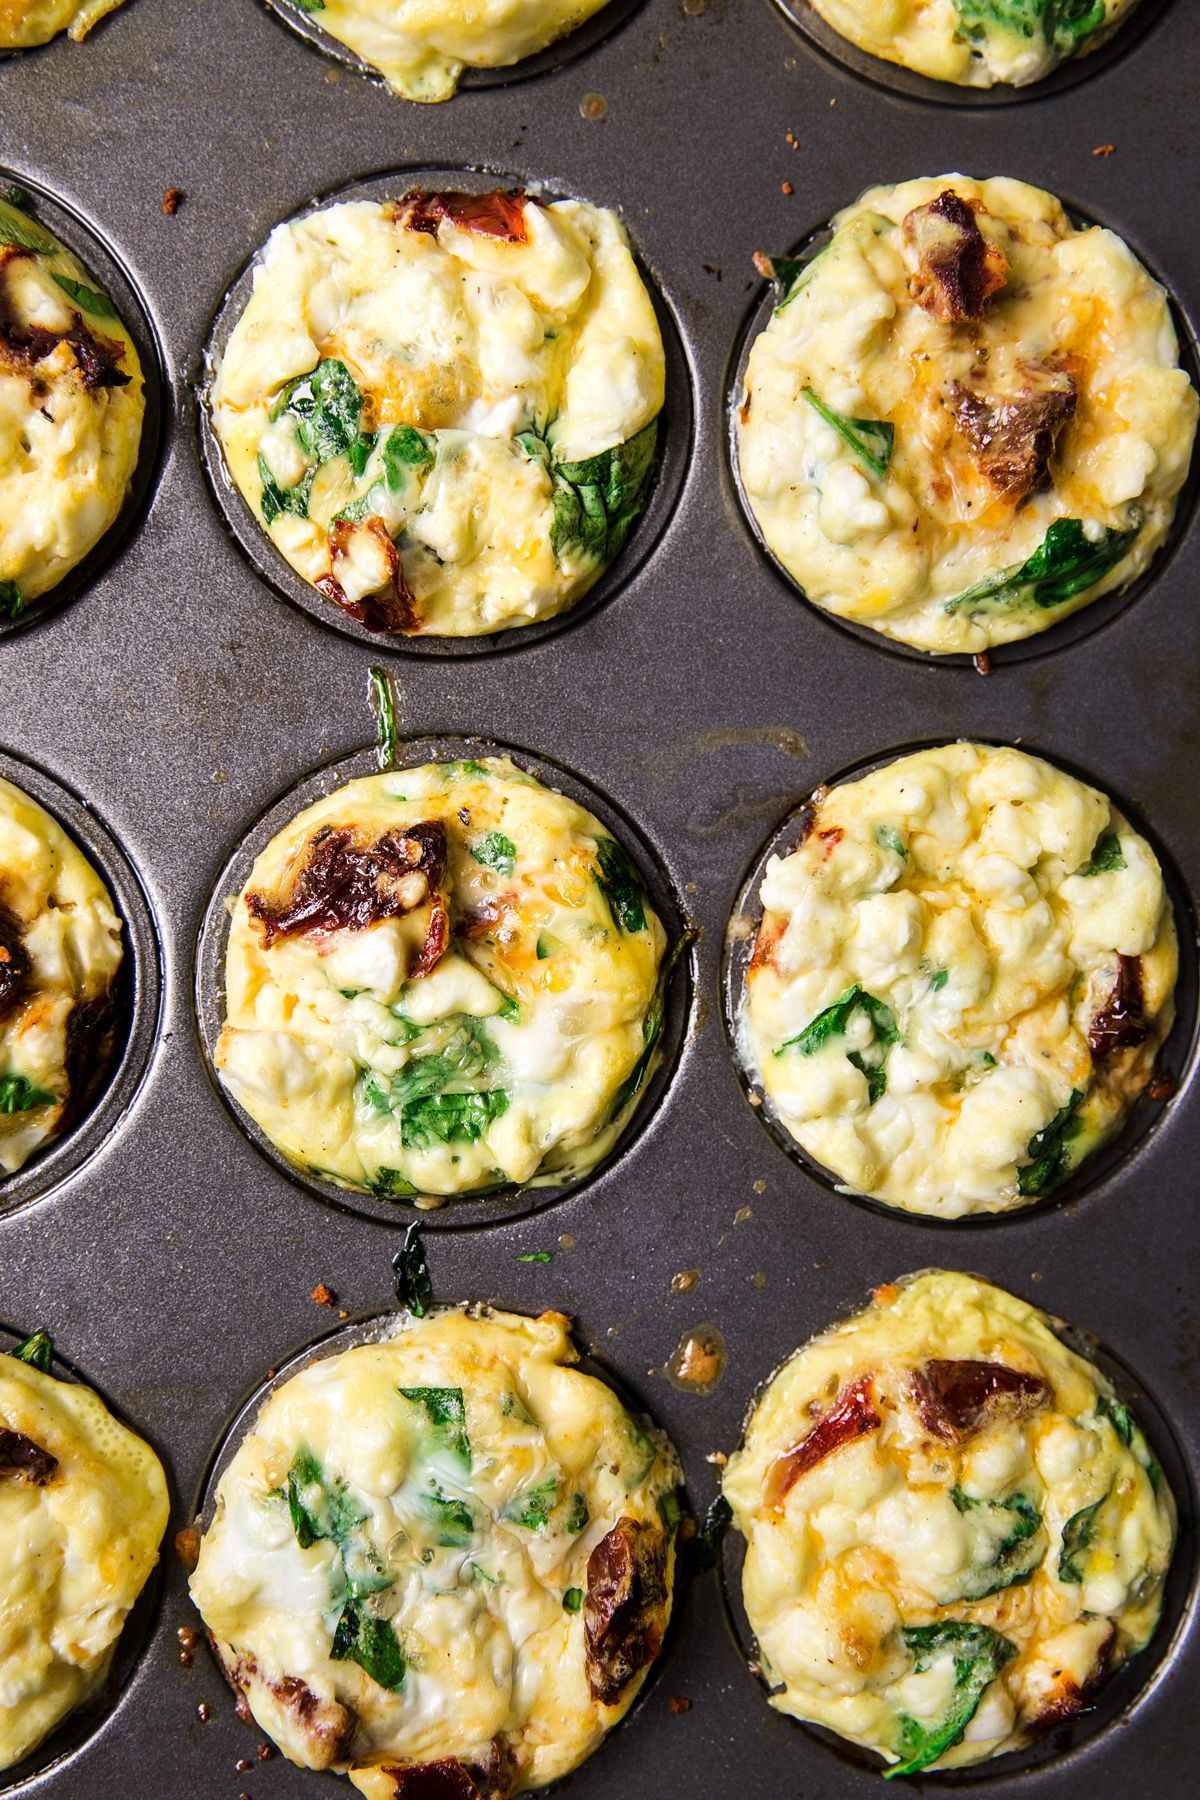 Healthy Breakfast Egg Muffins With Spinach
 Feta Spinach Breakfast Egg Muffins with Sun Dried Tomatoes